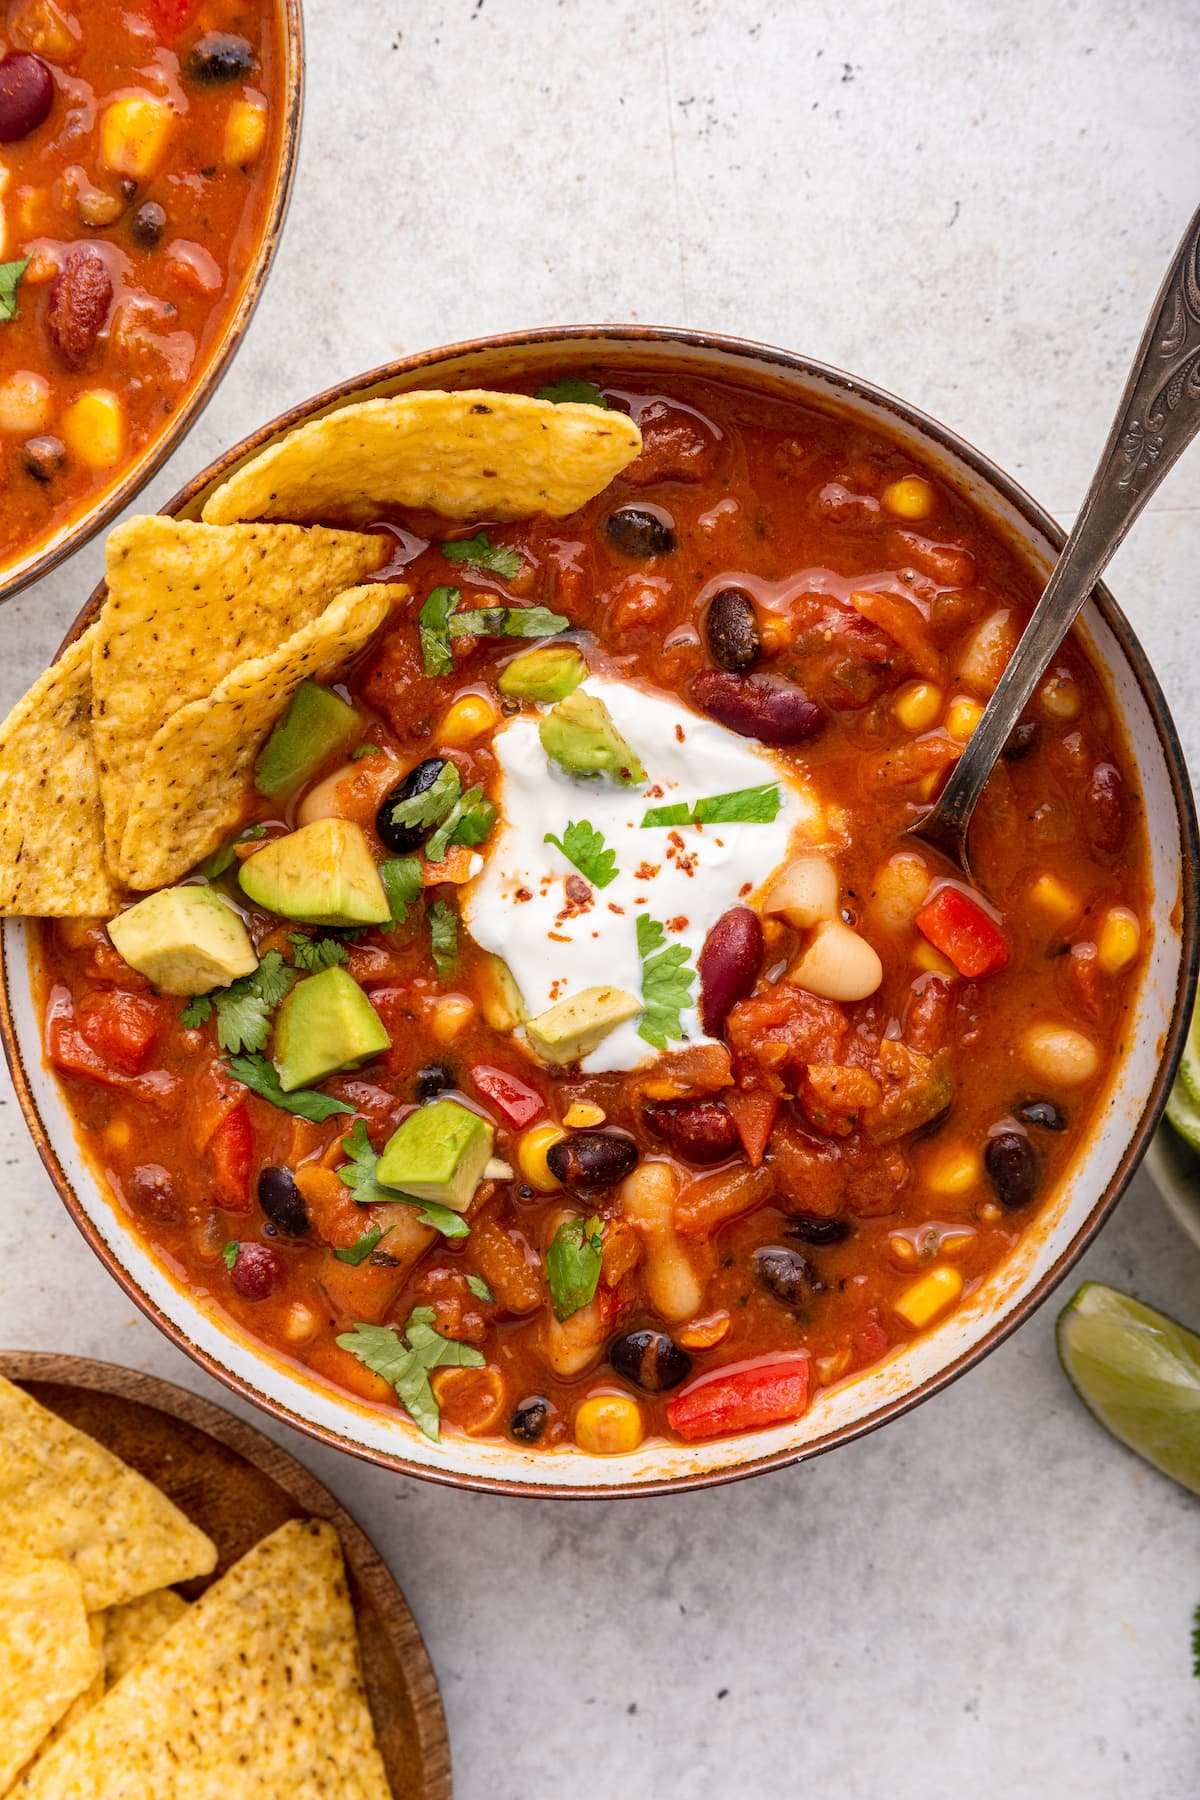 Vegetarian chili in a bowl with tortilla chips and a spoon. The chili is garnished with cilantro, sour cream, and avocado.